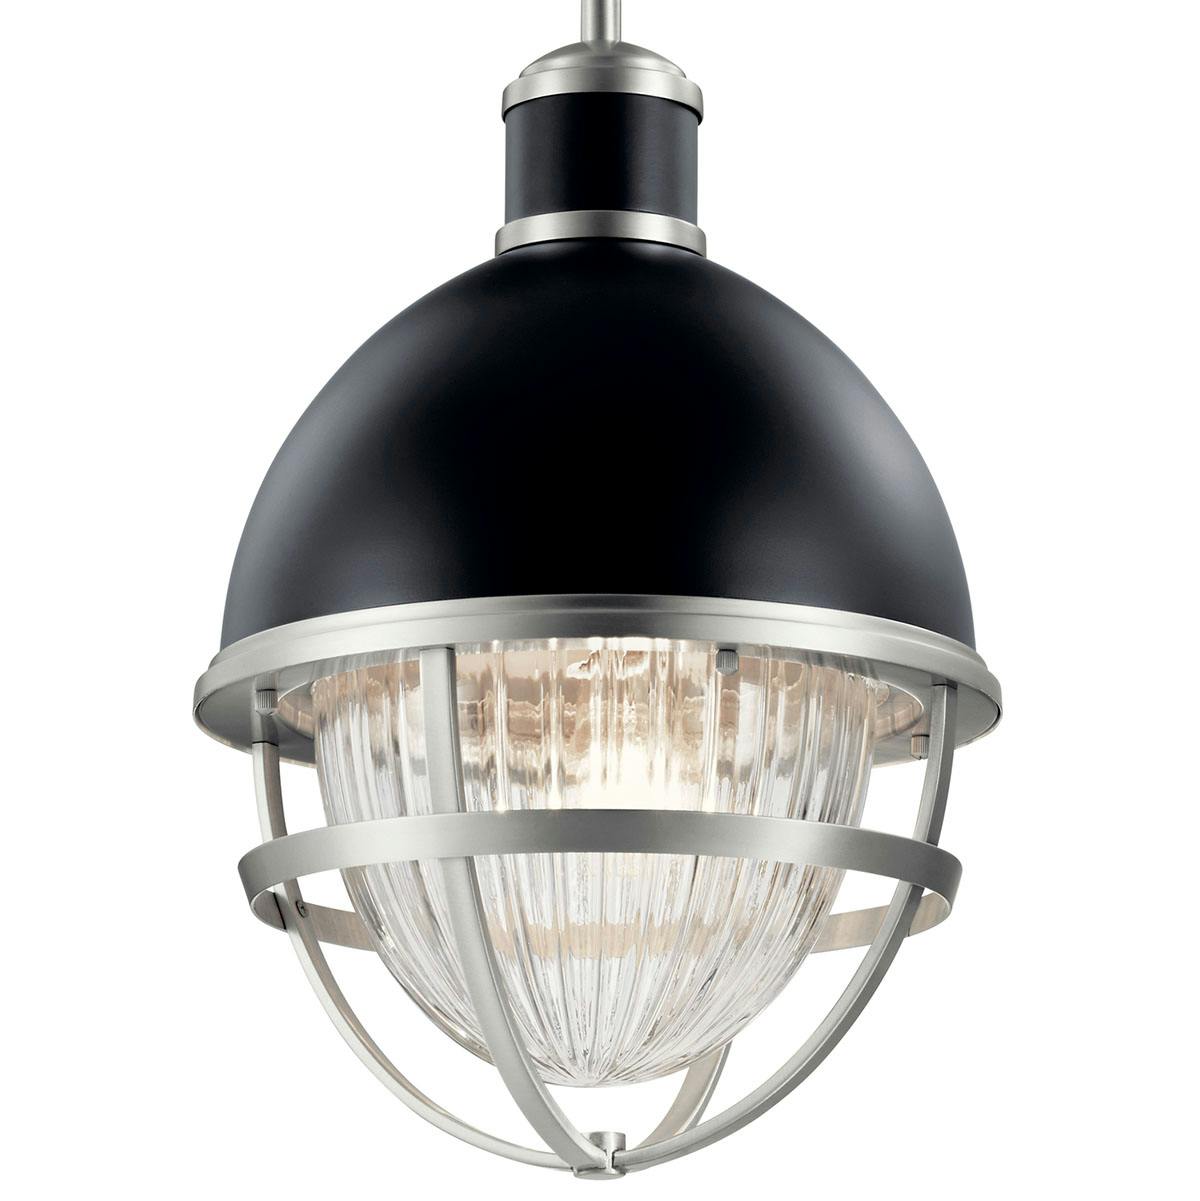 Close up view of the Tollis 18" 1 Light Hanging Pendant Black on a white background